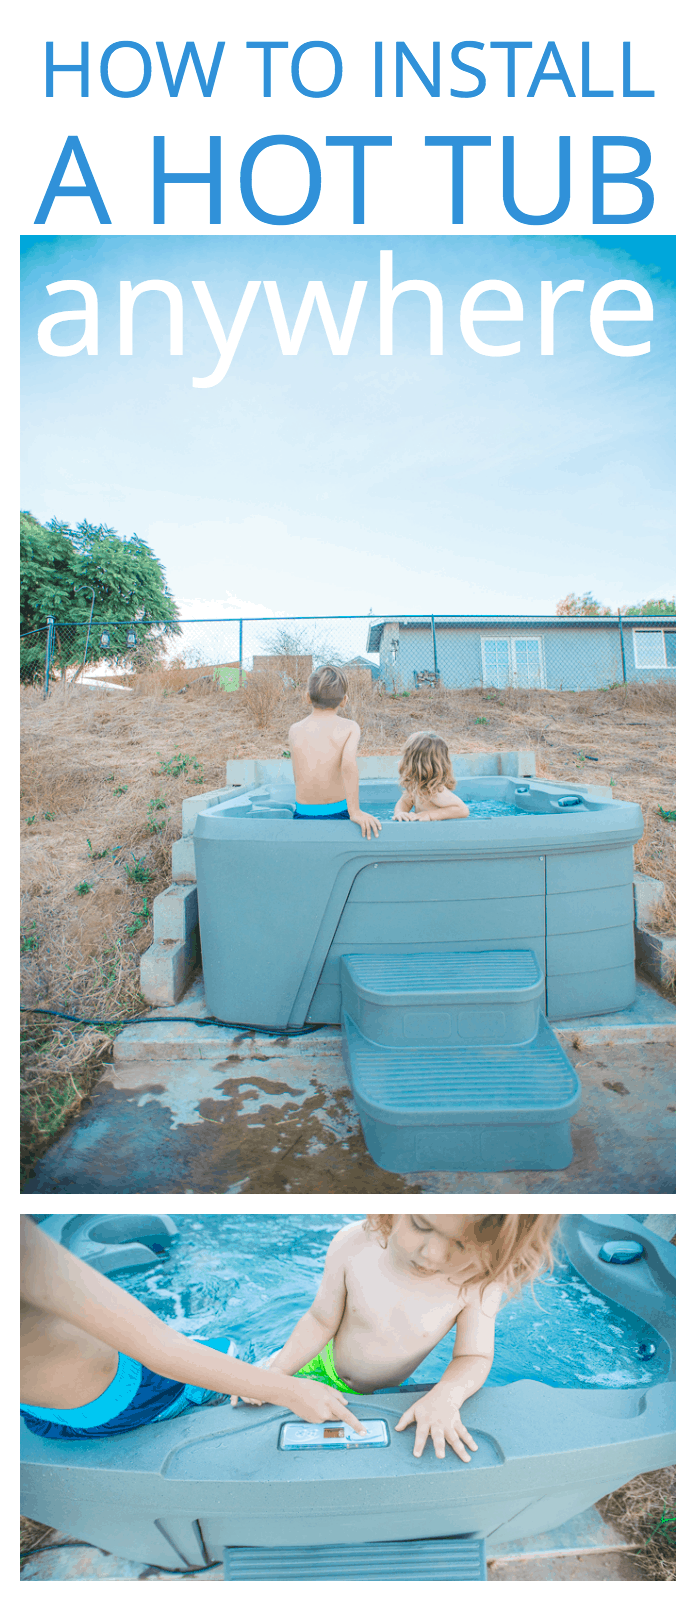 How to install a hot tub anywhere